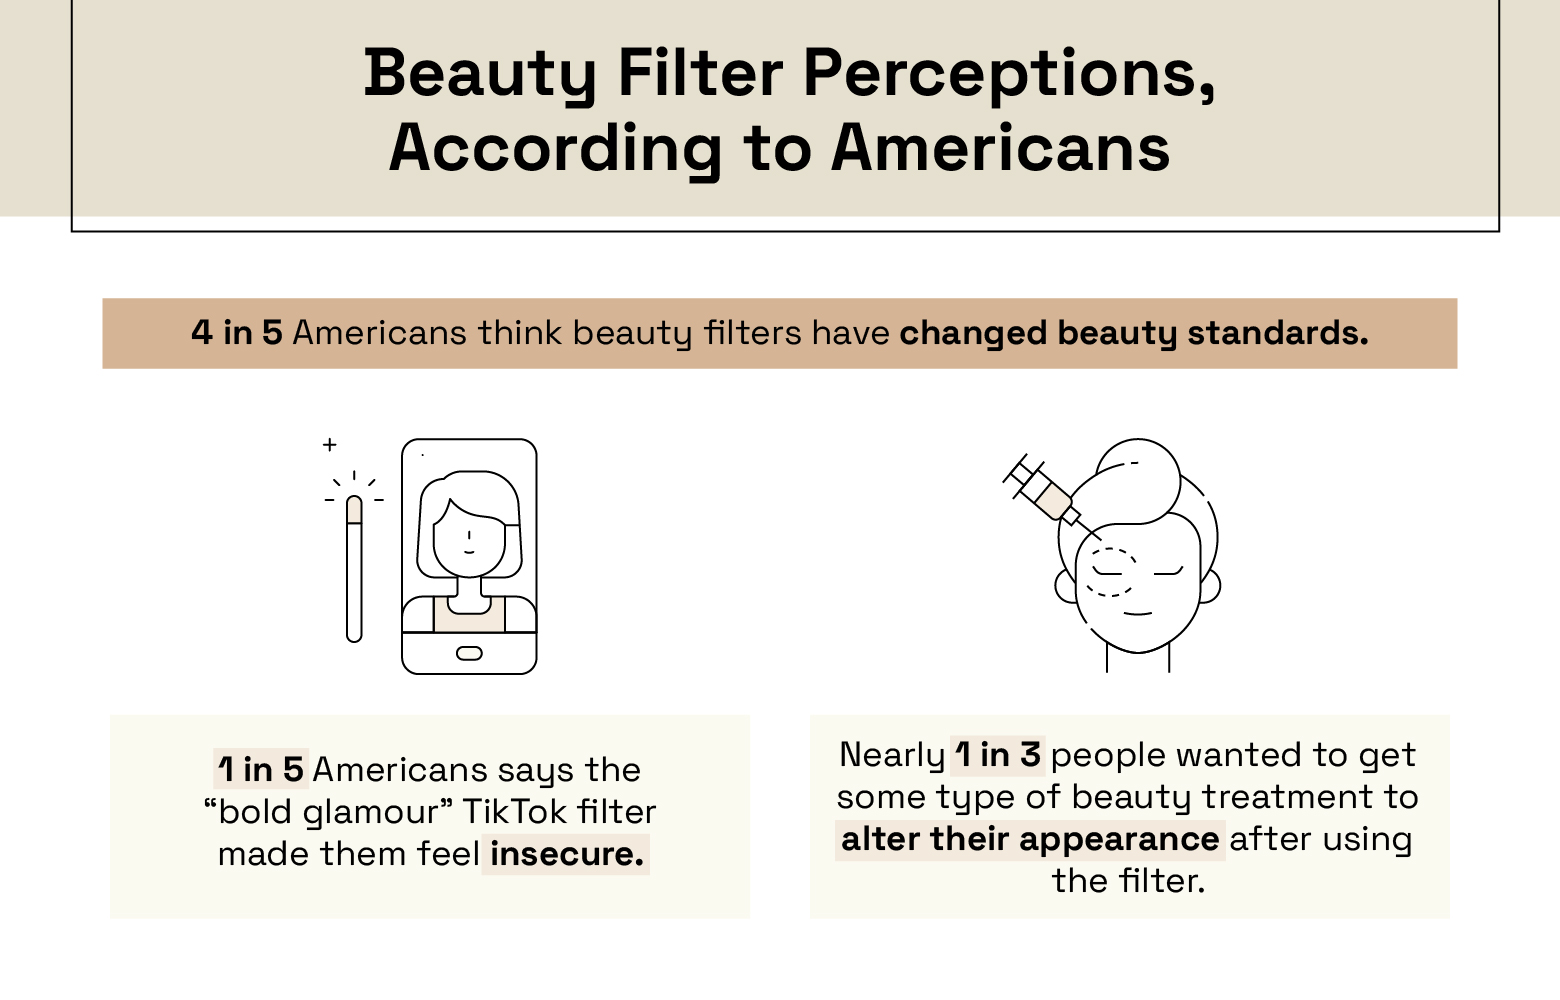 Illustrations and data regarding Americans’ perceptions of beauty filters
